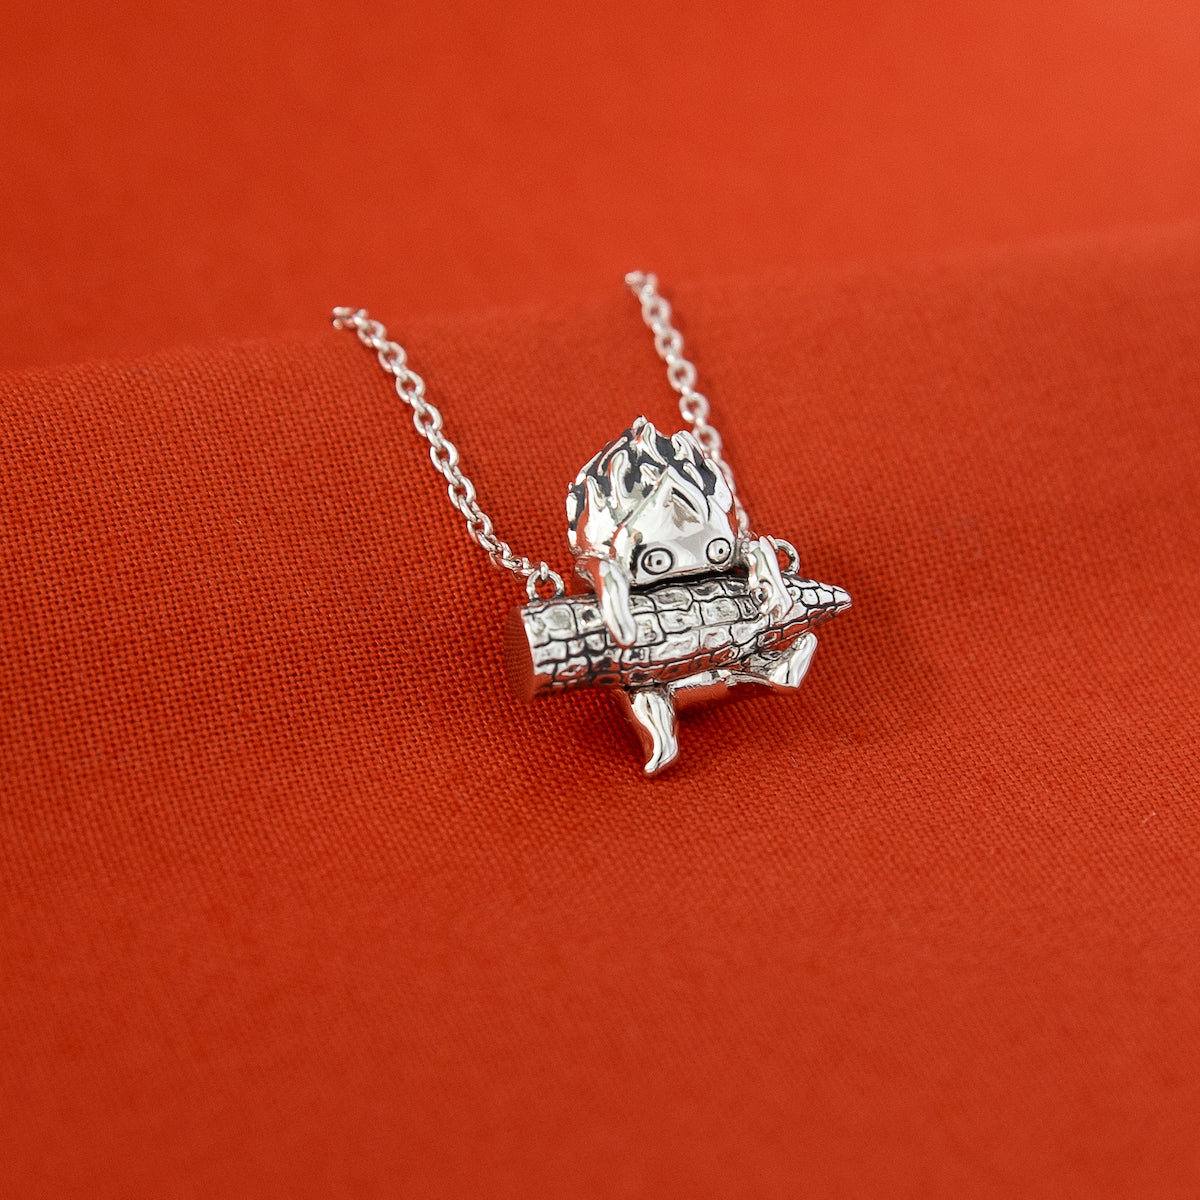 Howl's Moving Castle Necklace, Anime Jewelry, Studio Ghibli